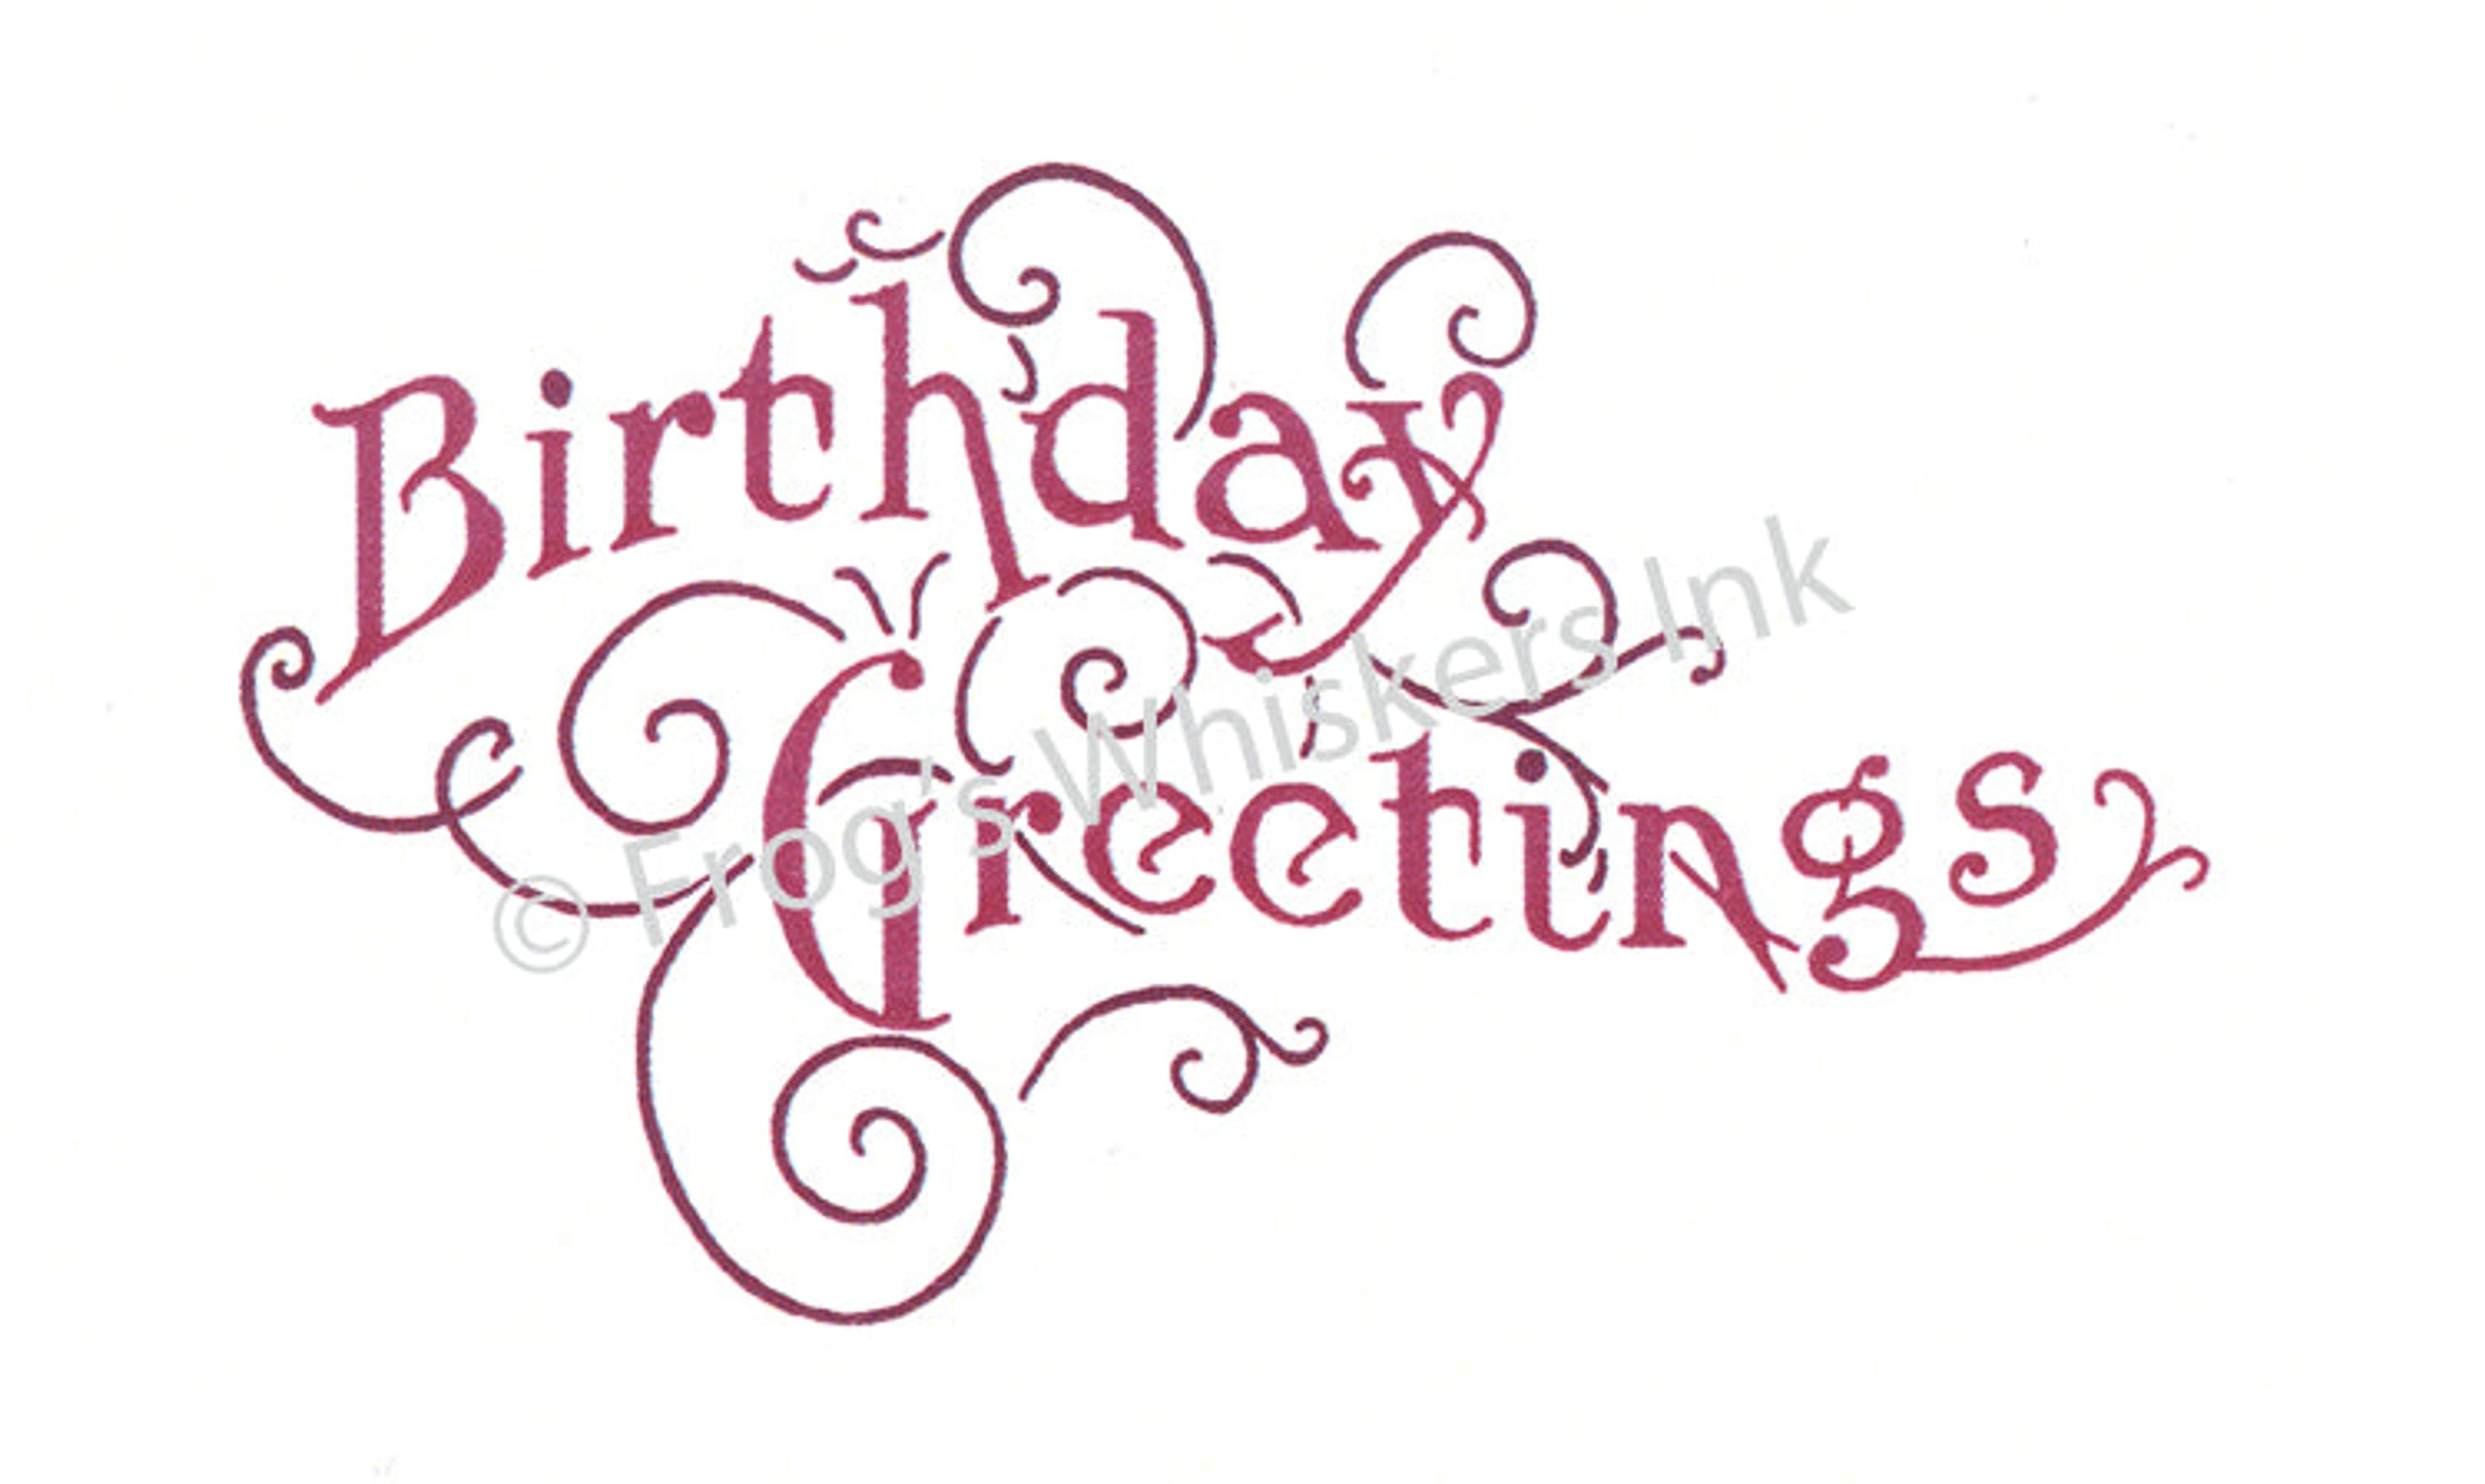 Frog's Whiskers Stamps - Fancy Birthday Greeting